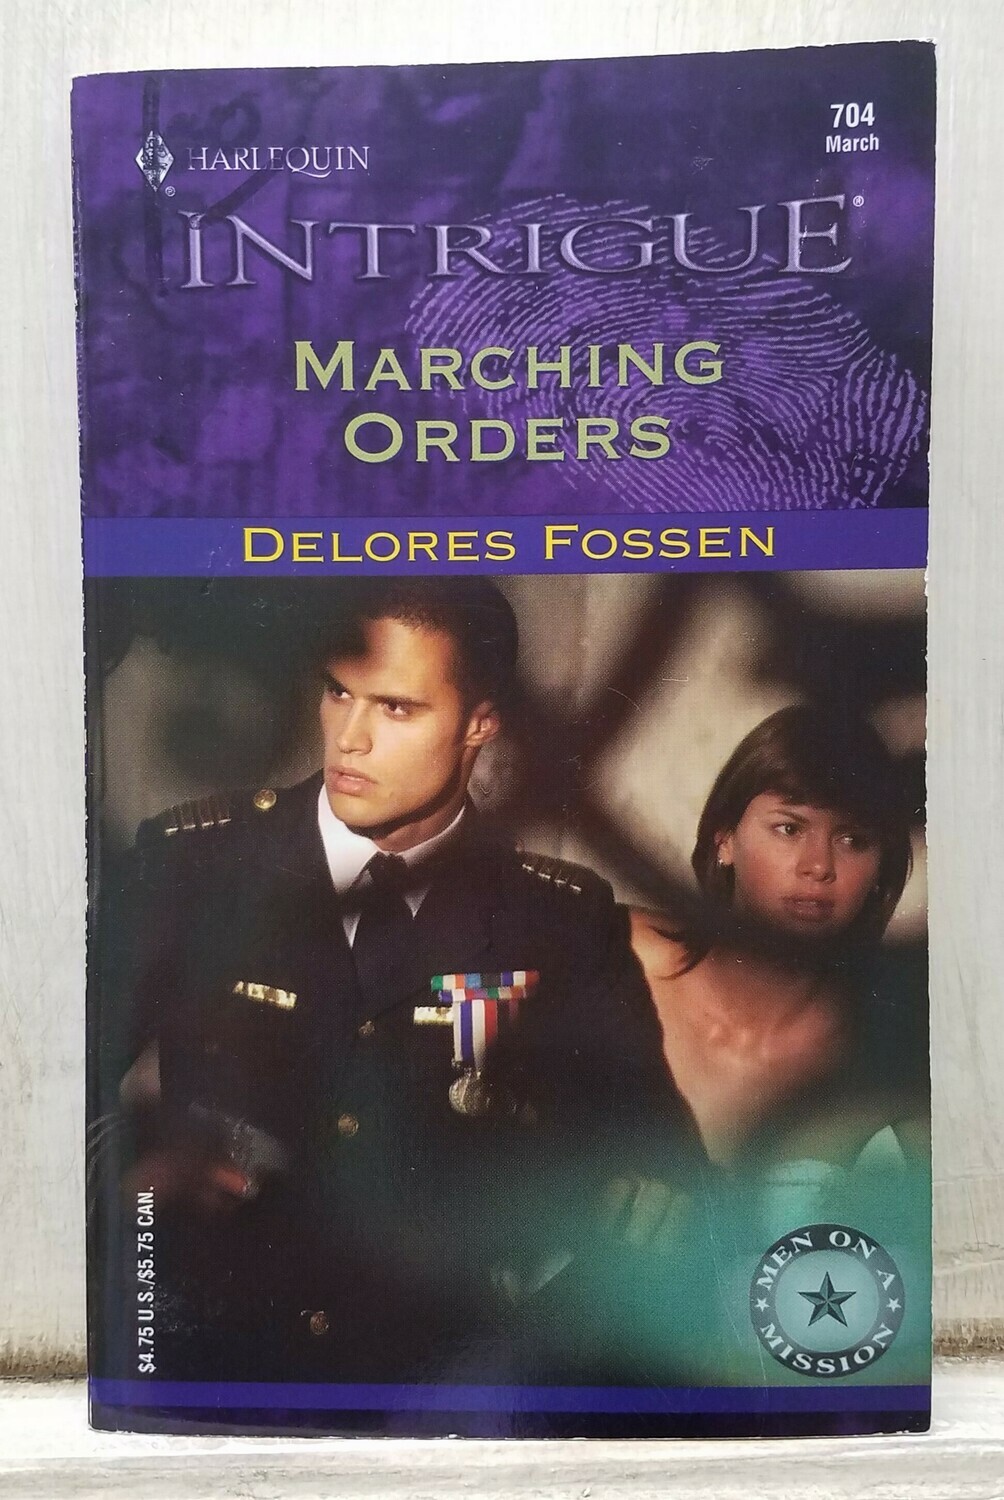 Marching Orders by Delores Fossen